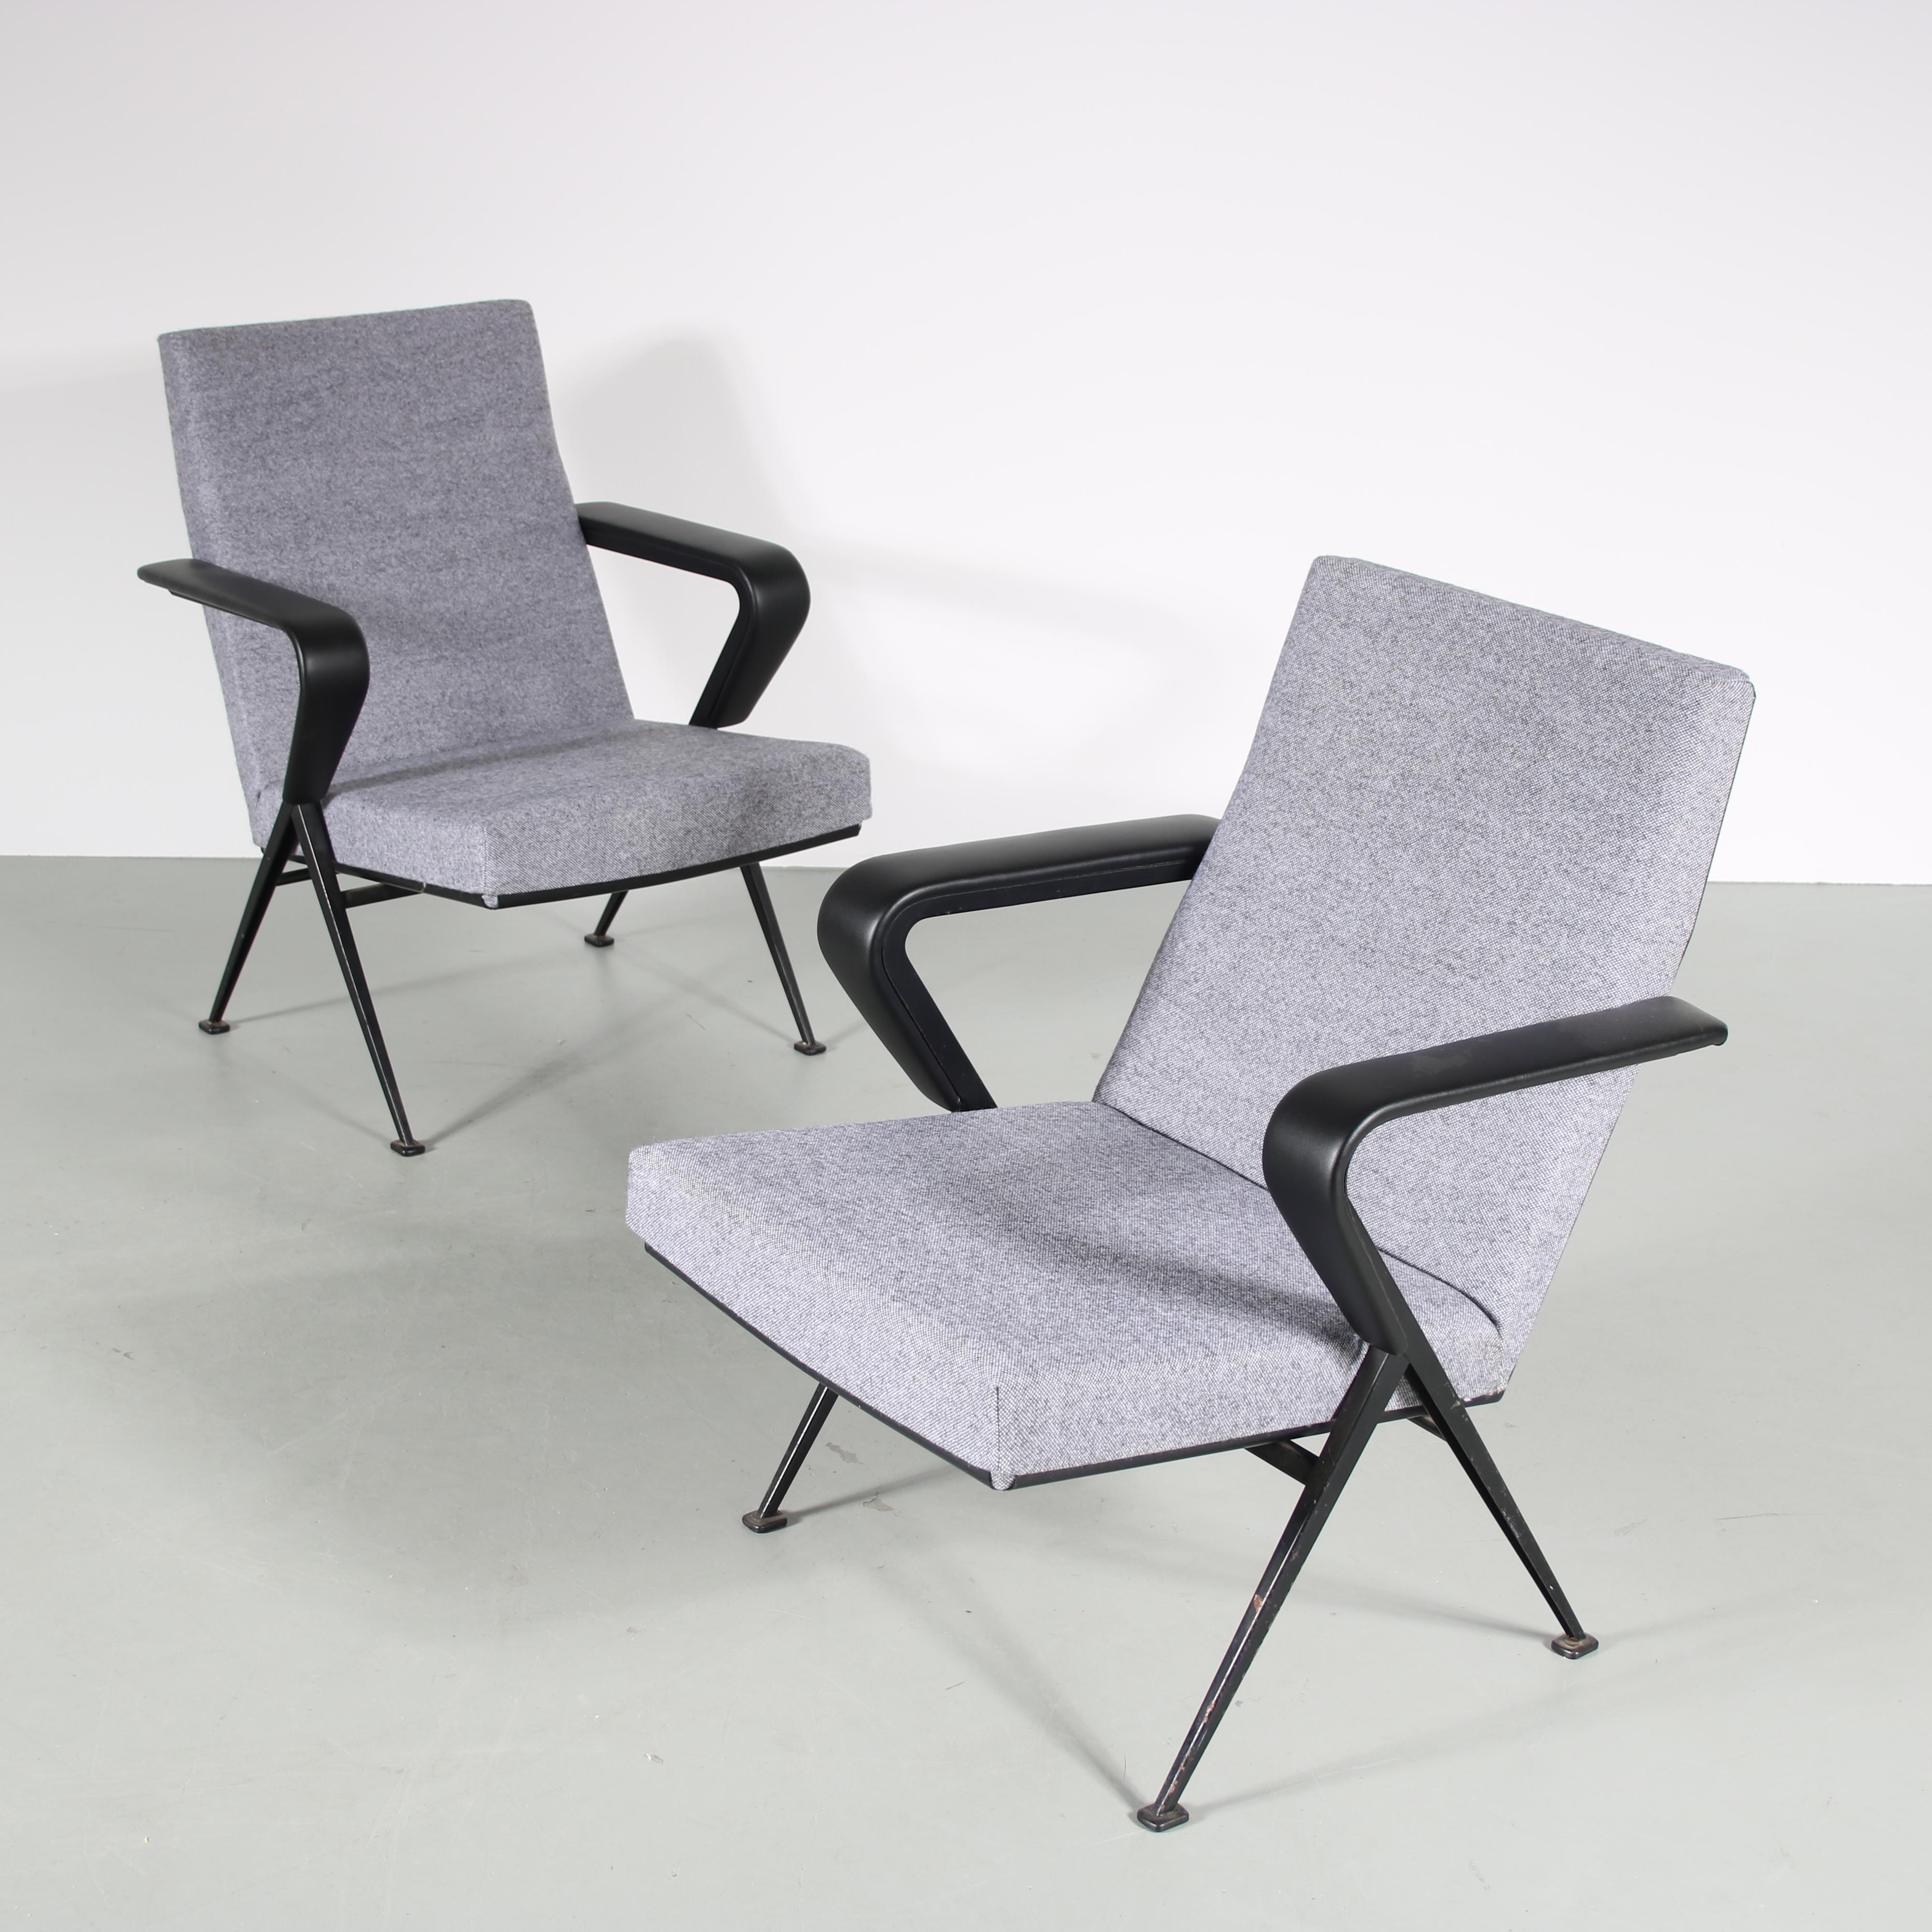 1960s Pair of “Repose” Chairs by Friso Kramer for Ahrend de Cirkel, Netherlands In Good Condition For Sale In Amsterdam, NL